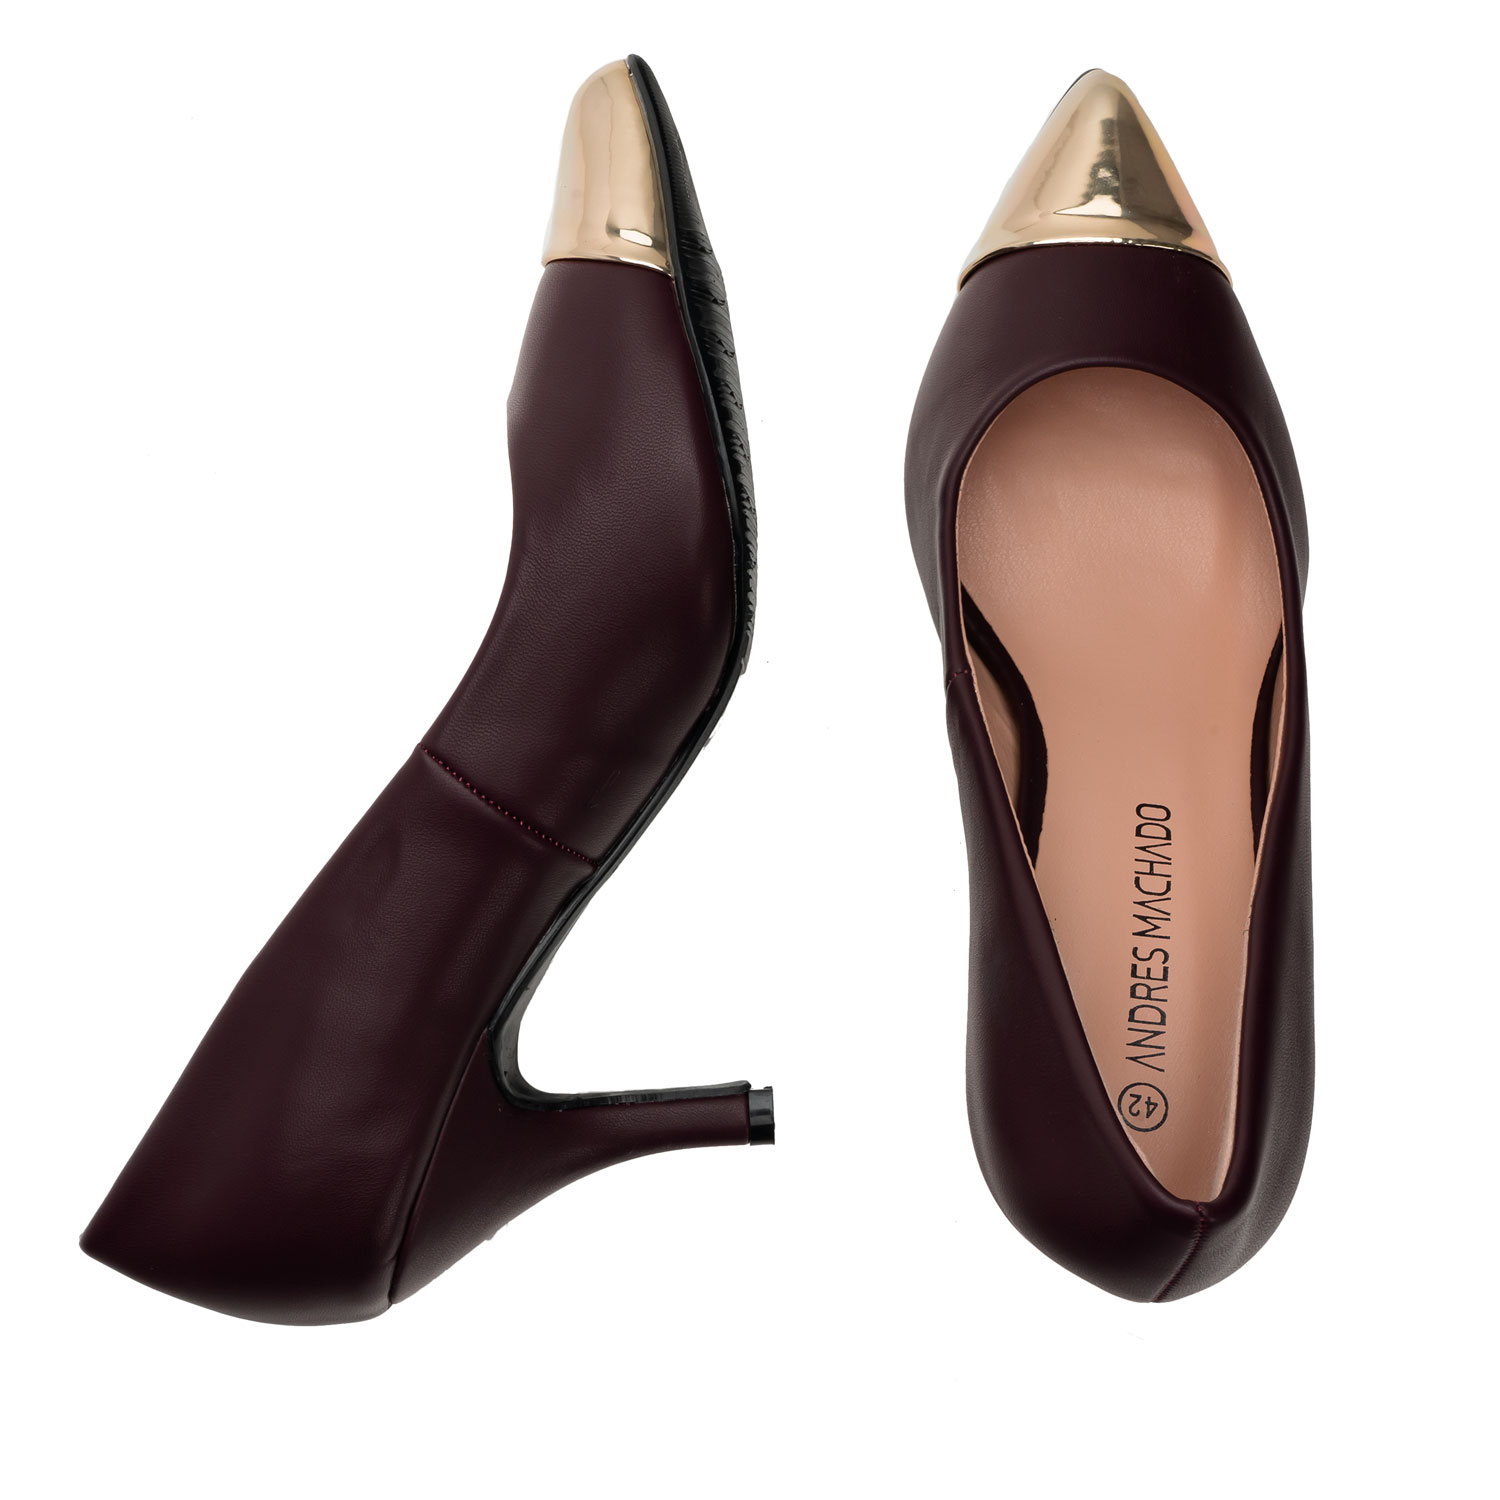 Stilettos in Burgundy Faux leather with Golden Toe Cap 